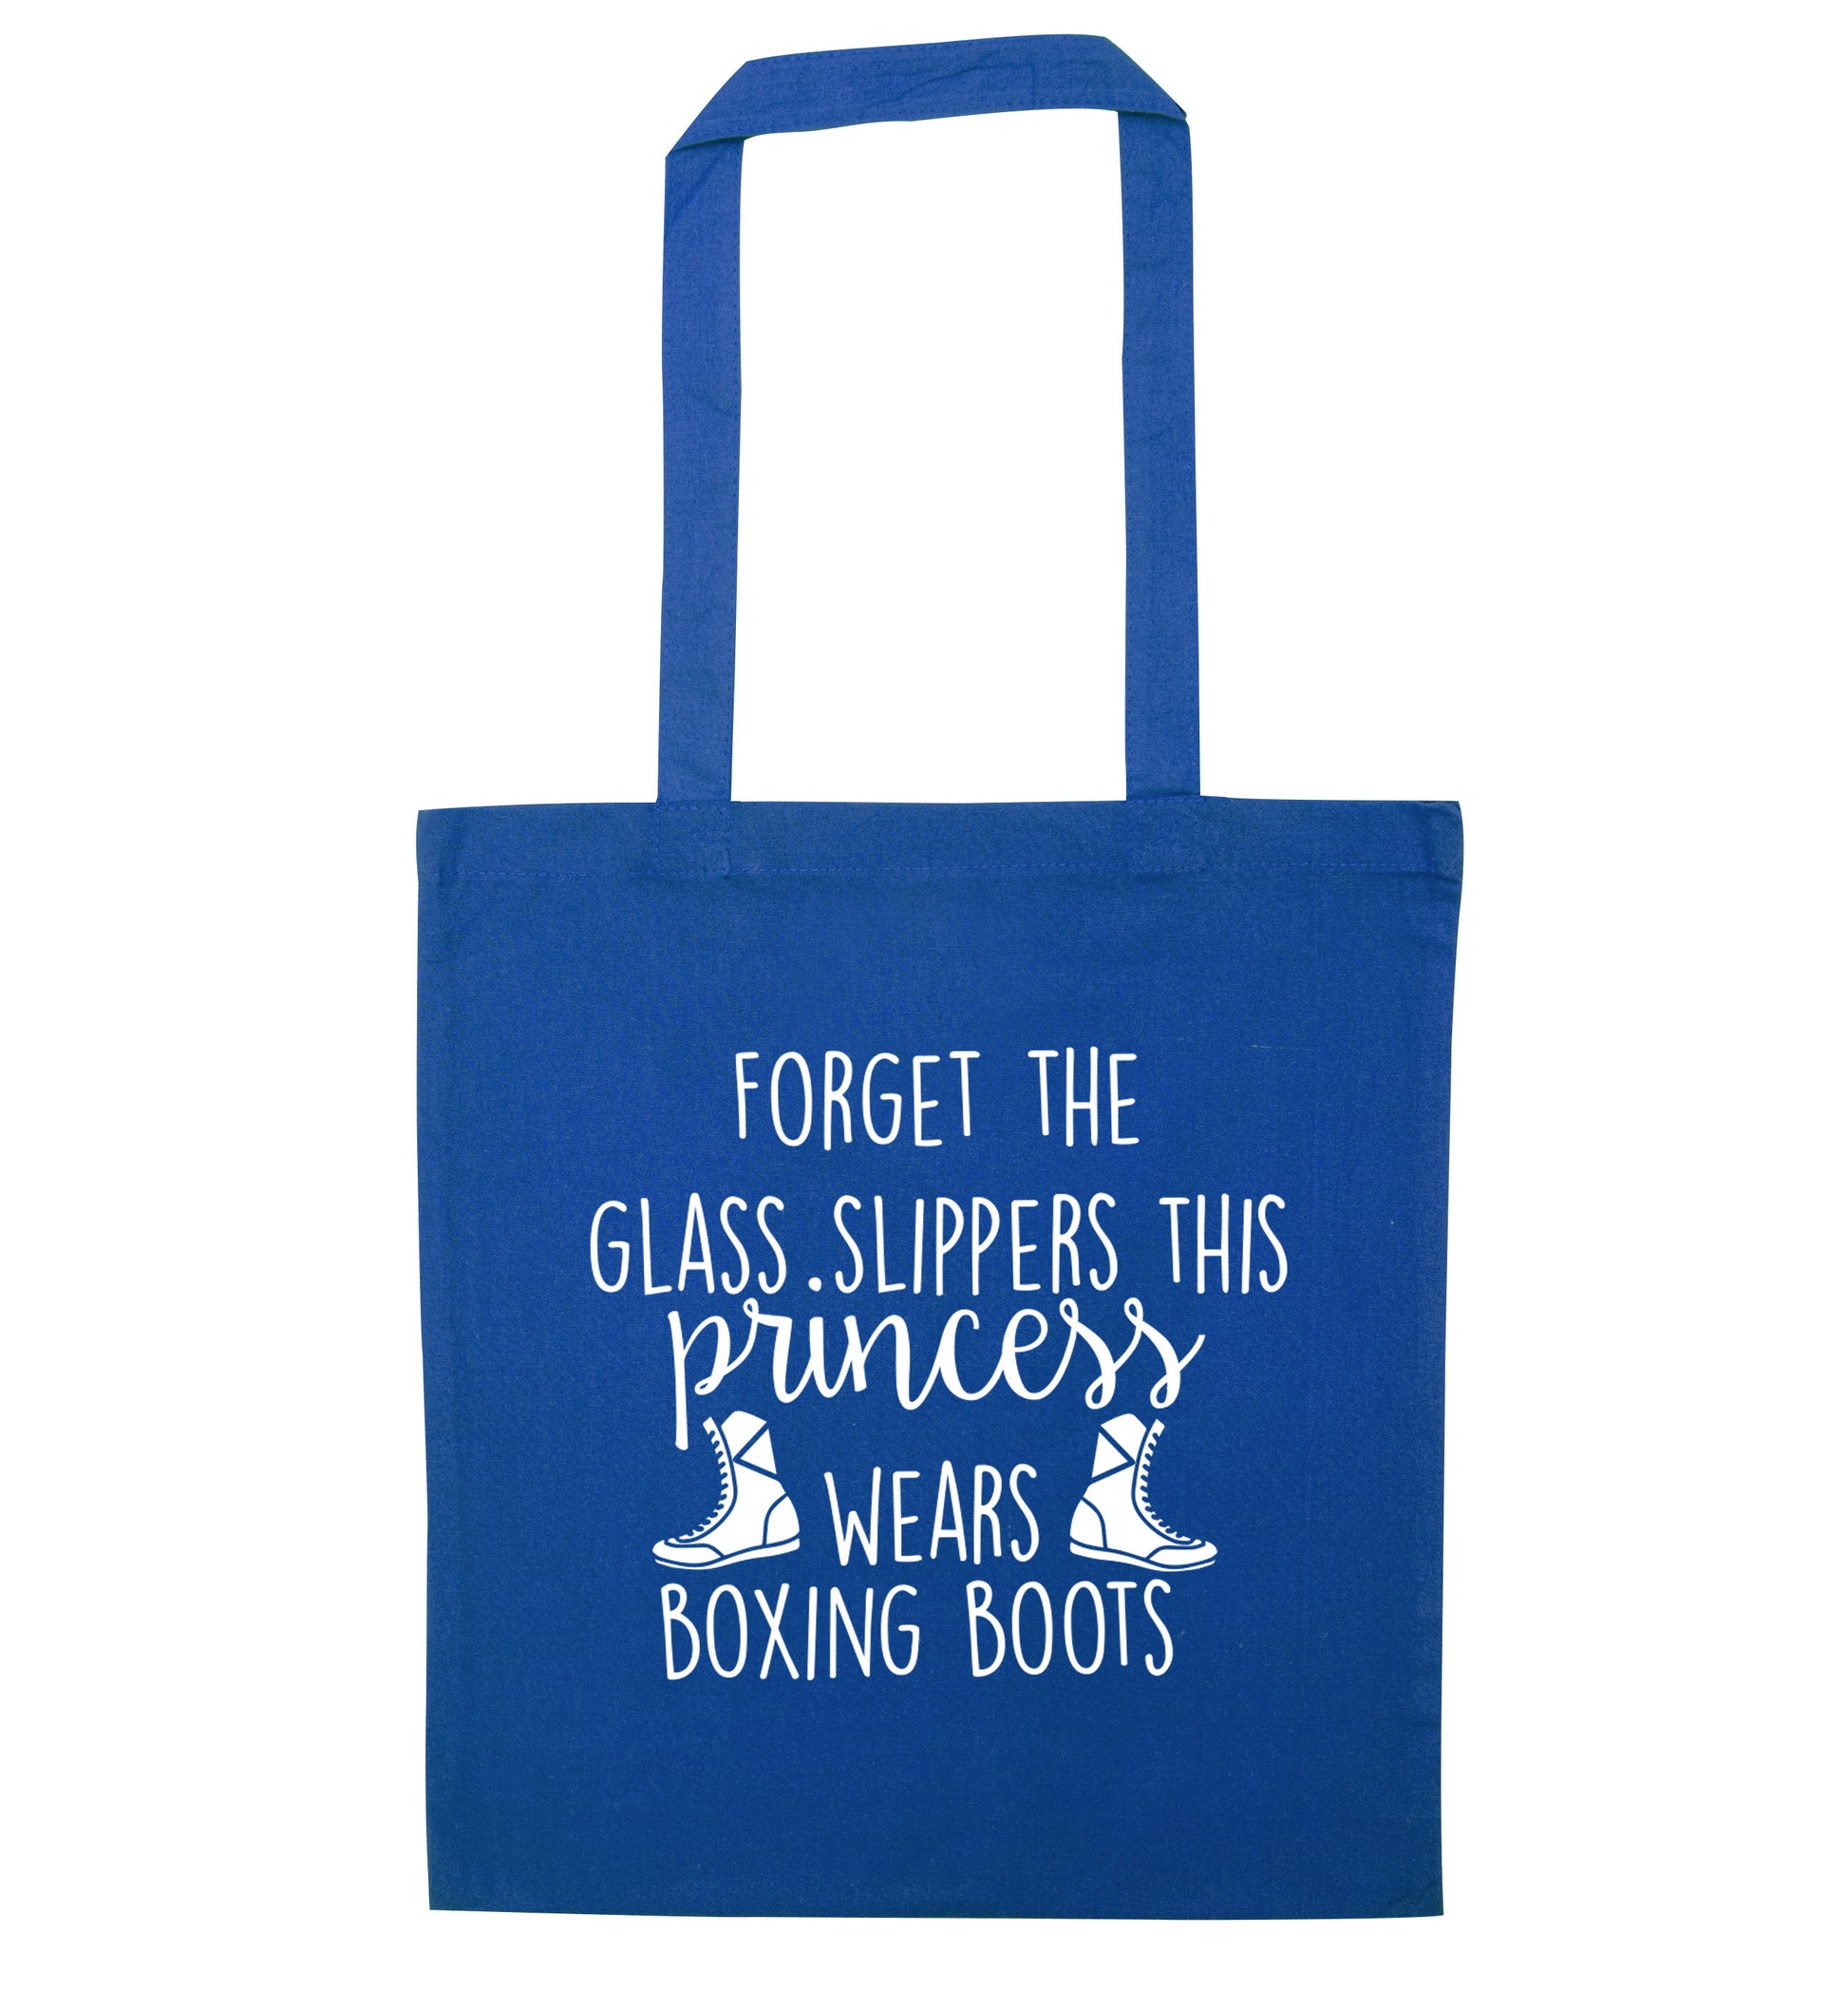 Forget the glass slippers this princess wears boxing boots blue tote bag